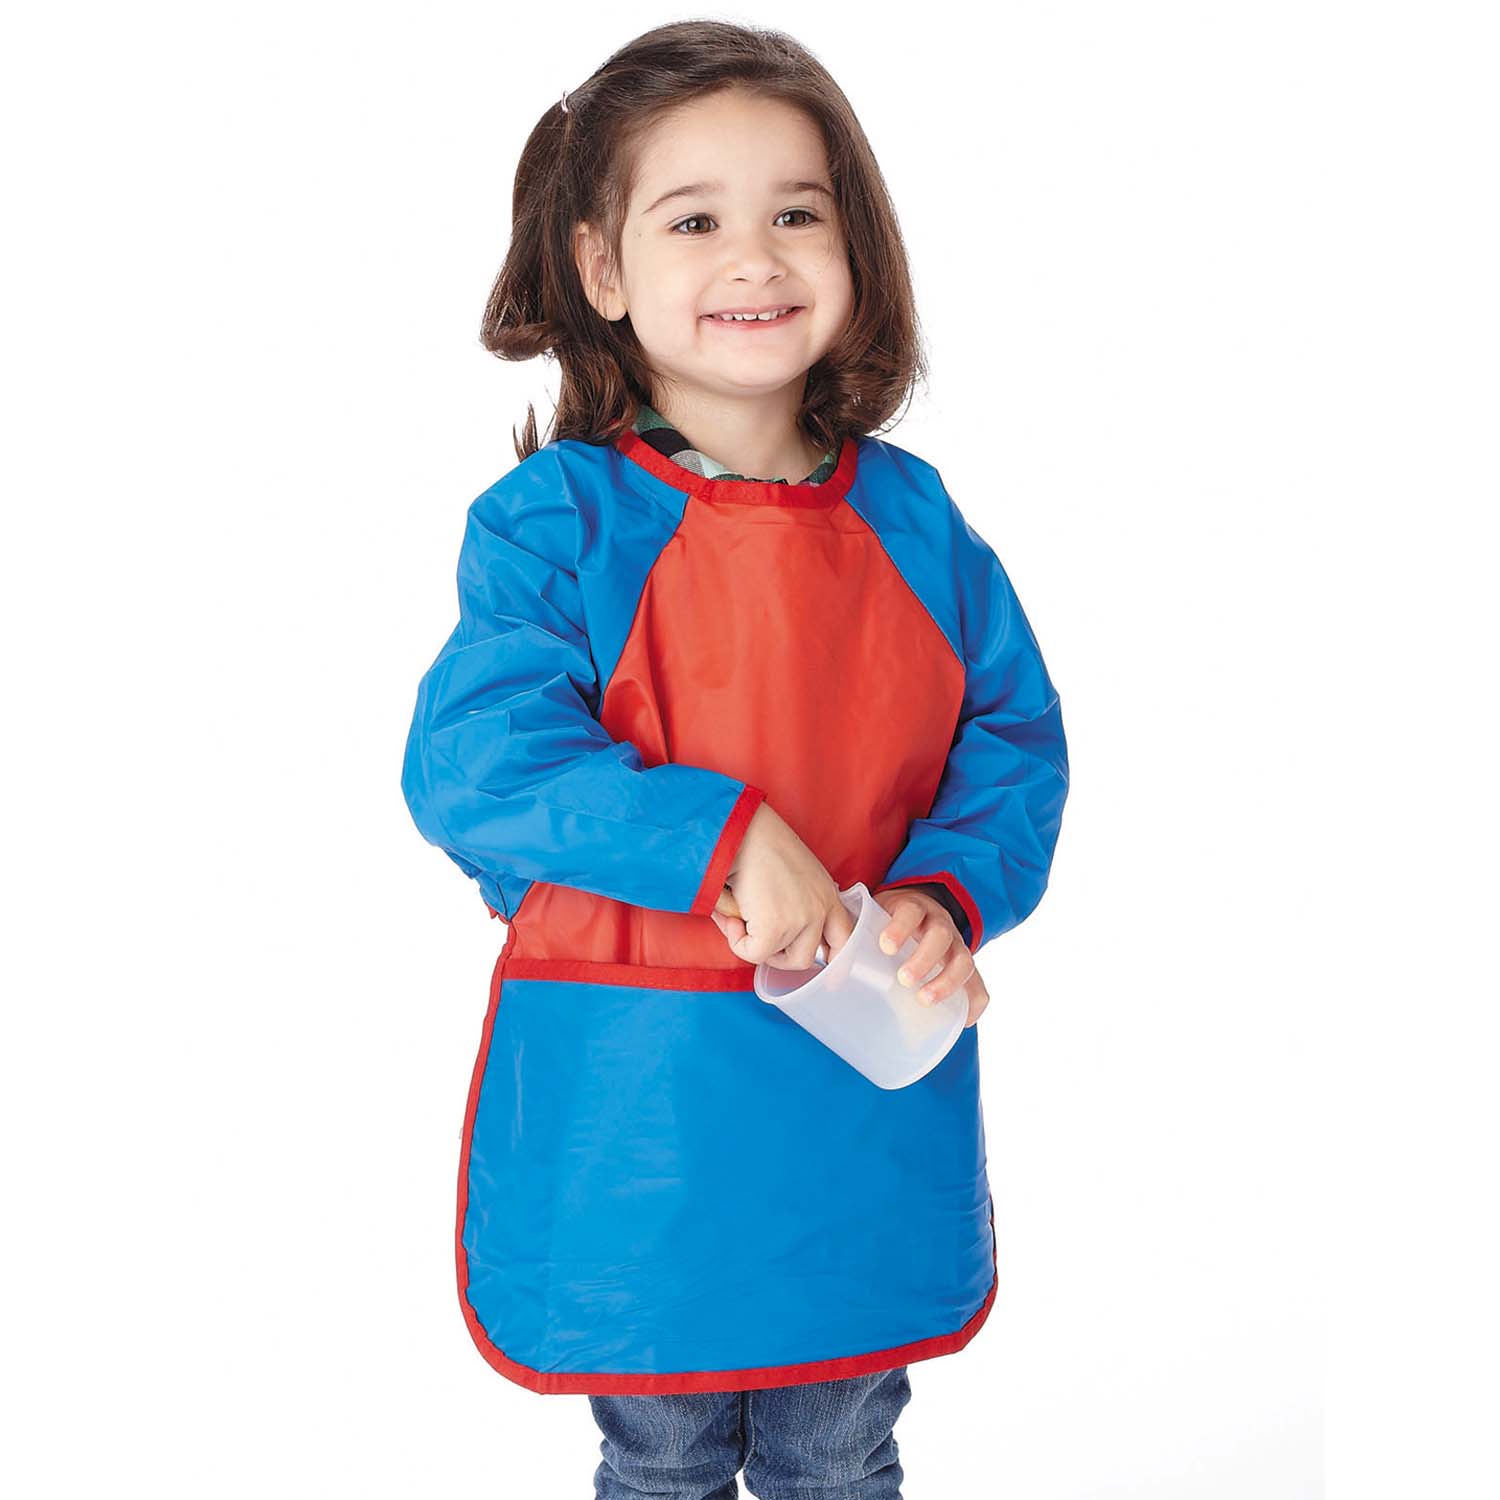 Colorations Machine Washable Toddler Smock